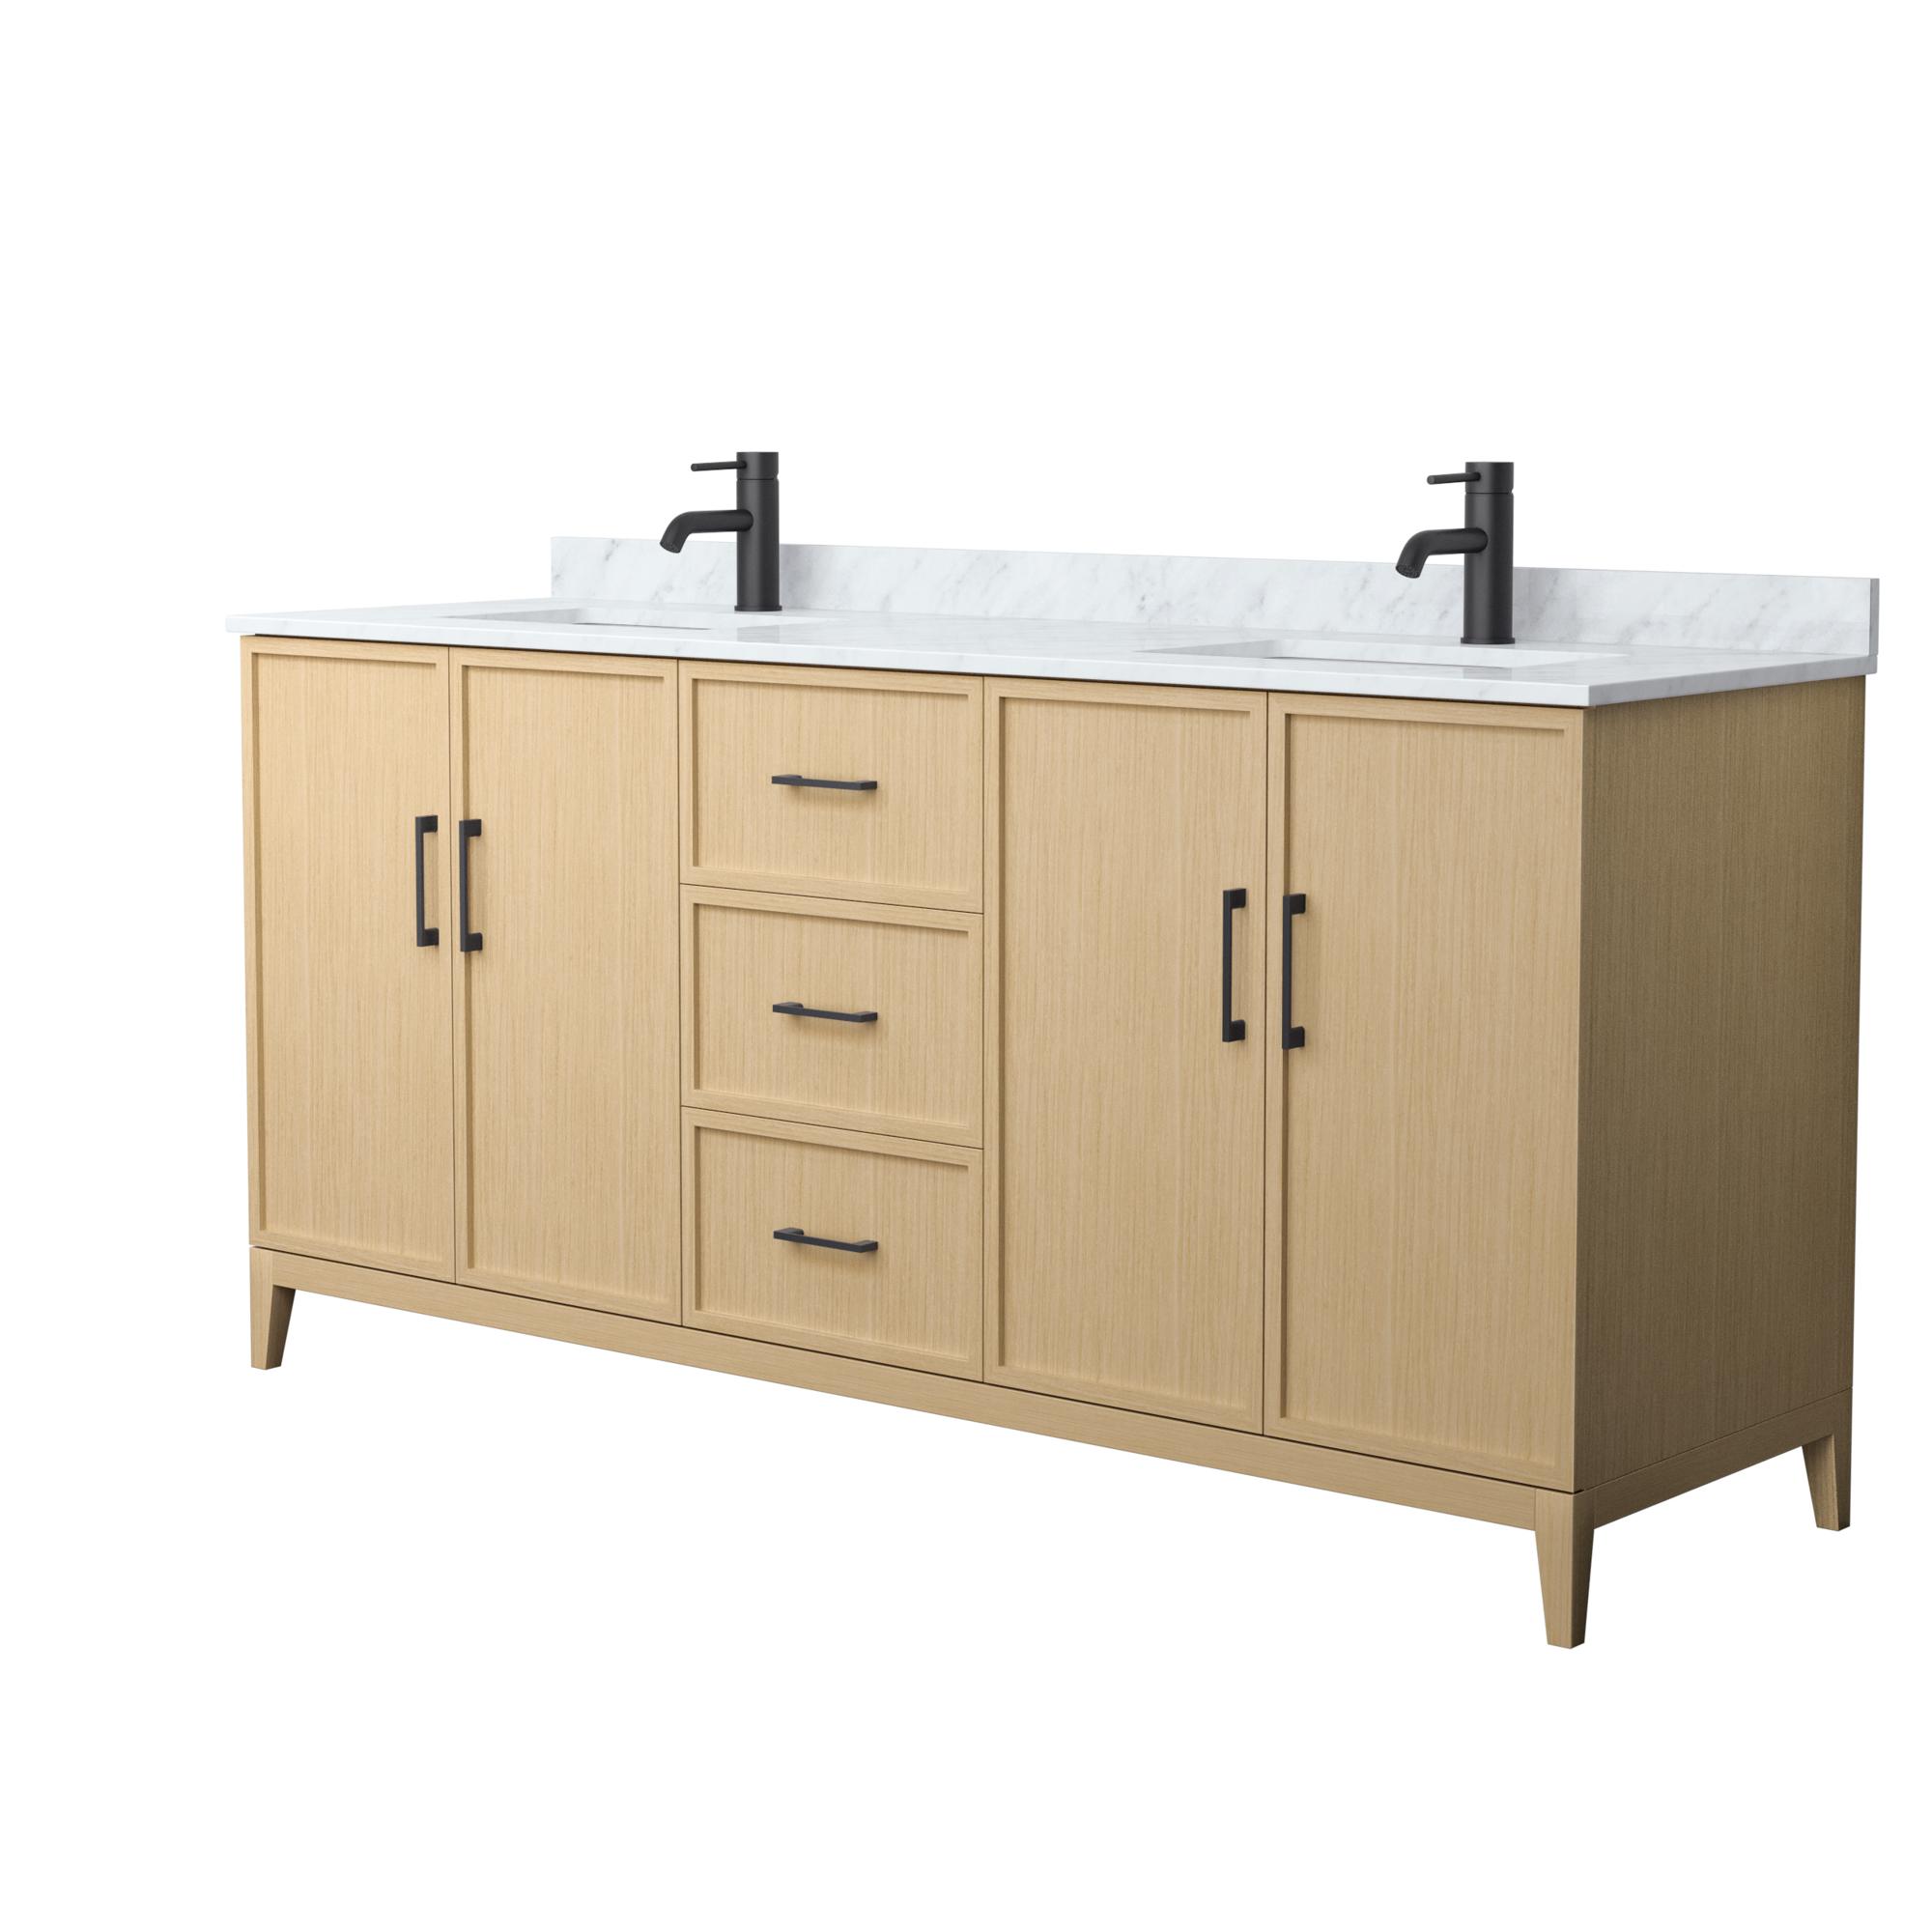 72" Transitional Double Vanity Base in White Oak, 7 Top Options with 2 Hardware Option